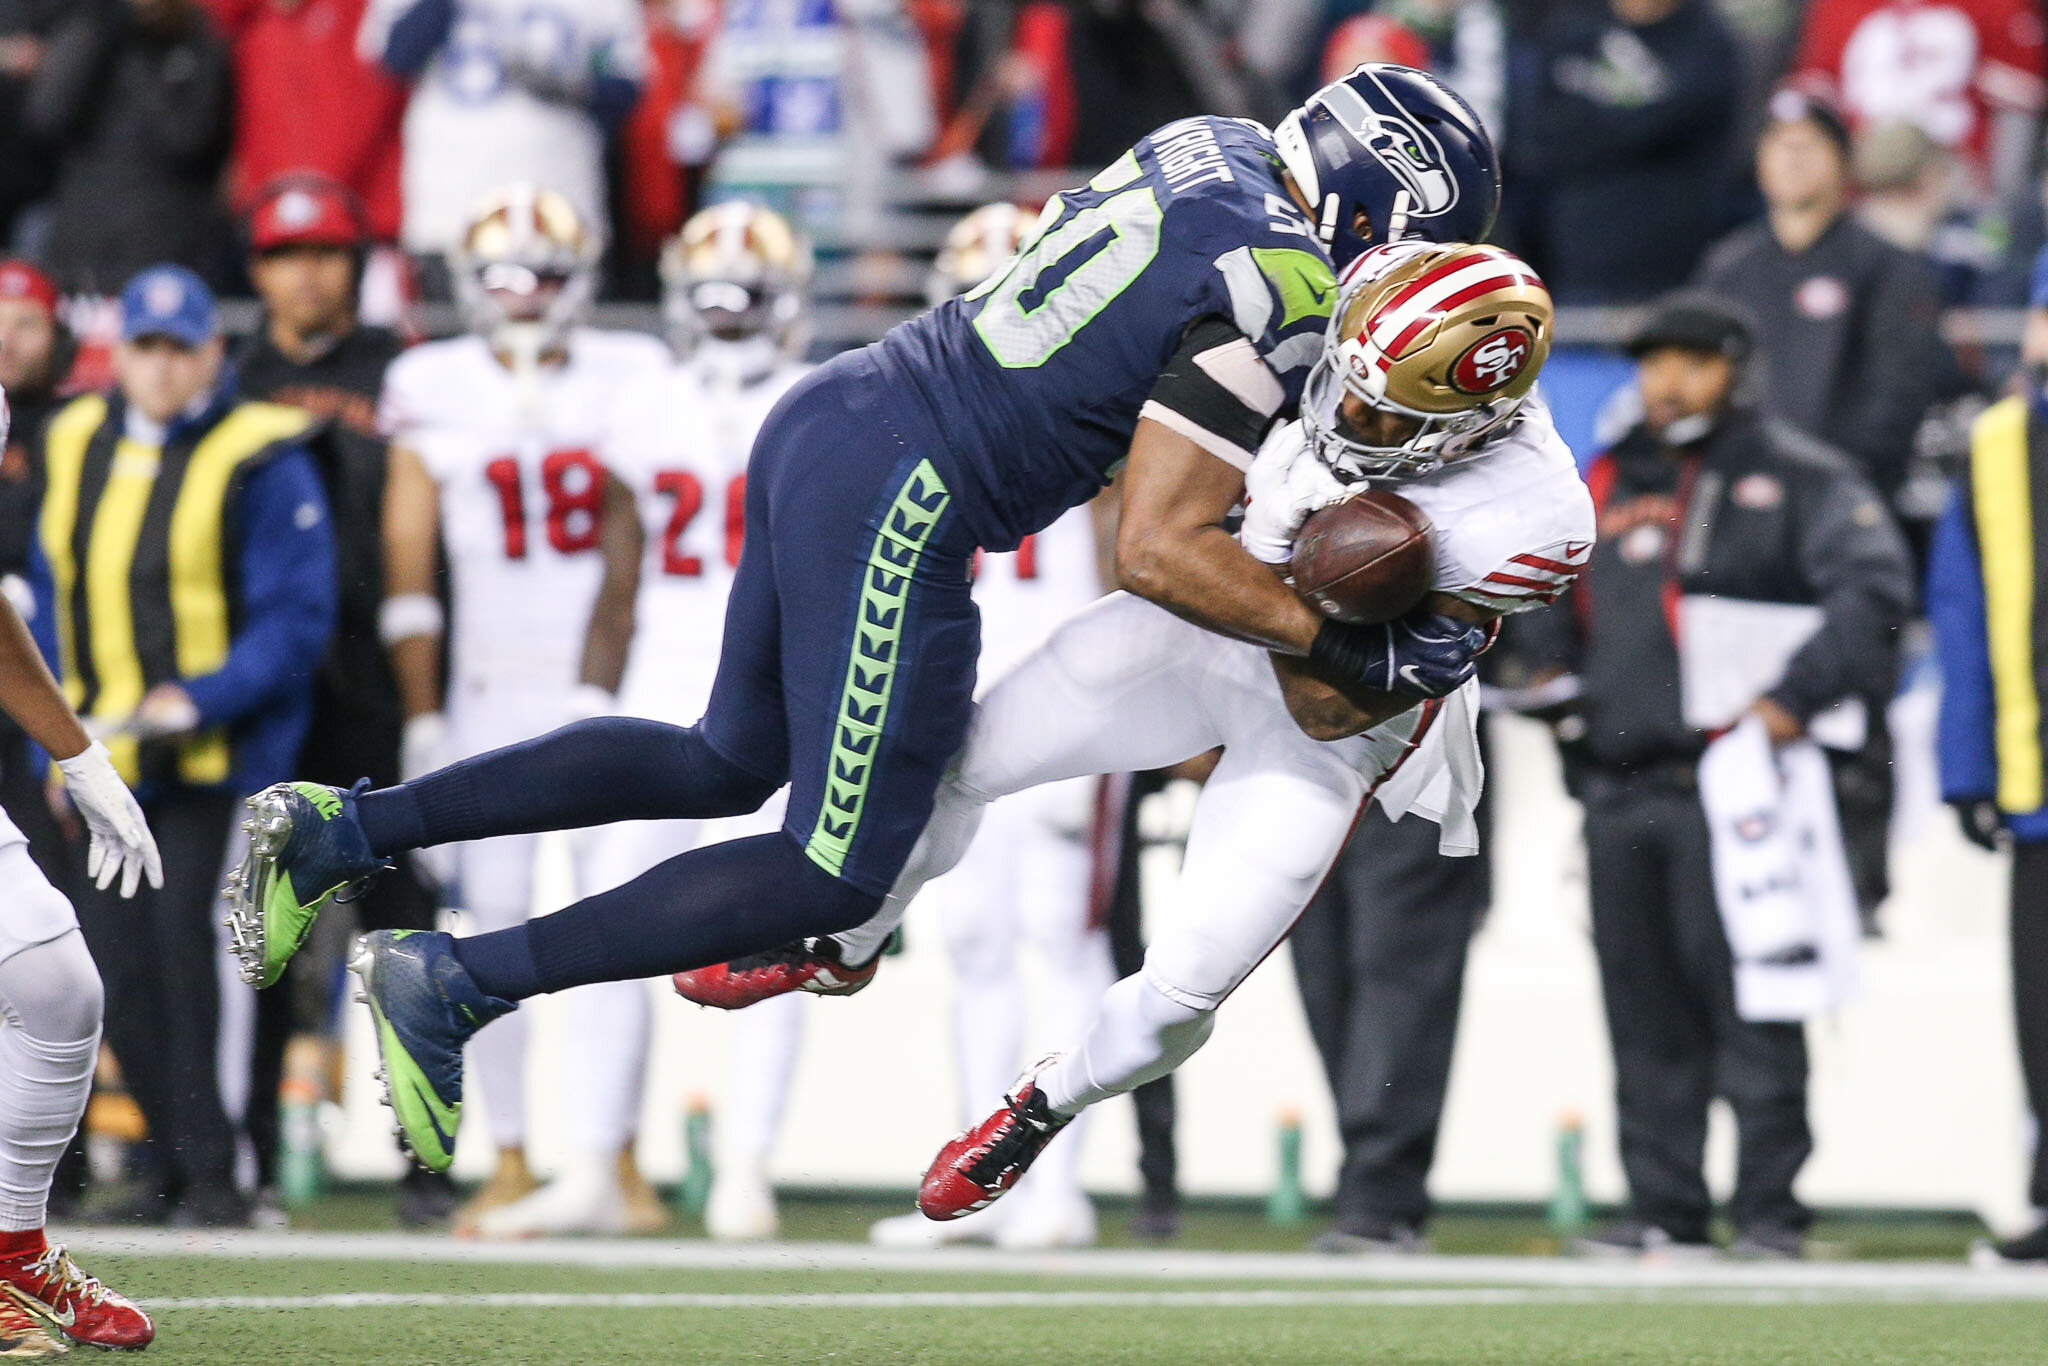  Seattle Seahawks outside linebacker K.J. Wright (50) hits San Francisco 49ers wide receiver Emmanuel Sanders (17) during the second quarter of an NFL football game, Sunday, December 29, 2019, in Seattle. The 49ers defeat the Seahawks 26-21. (Matt Fe